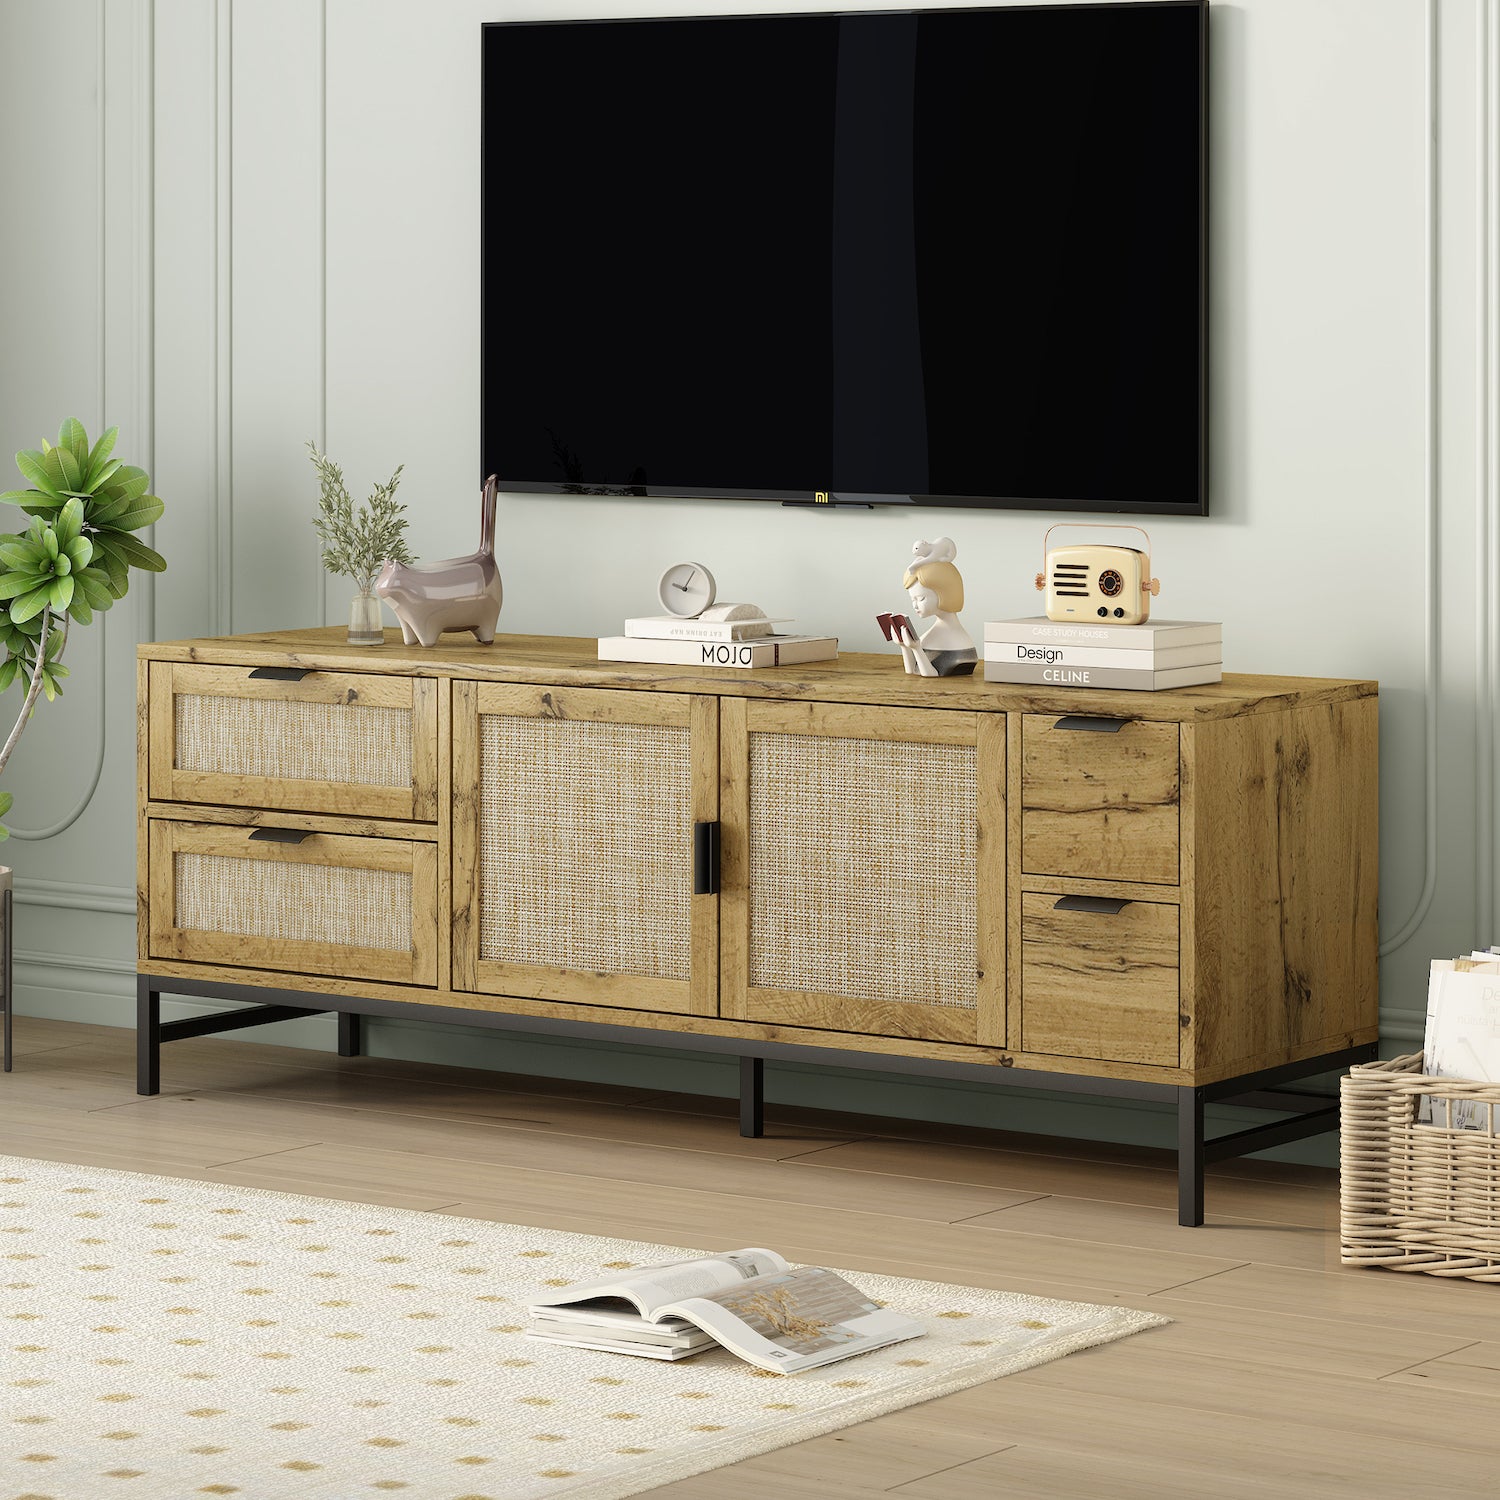 On-Trend Boho Style TV Stand with Rattan Doors - Brown